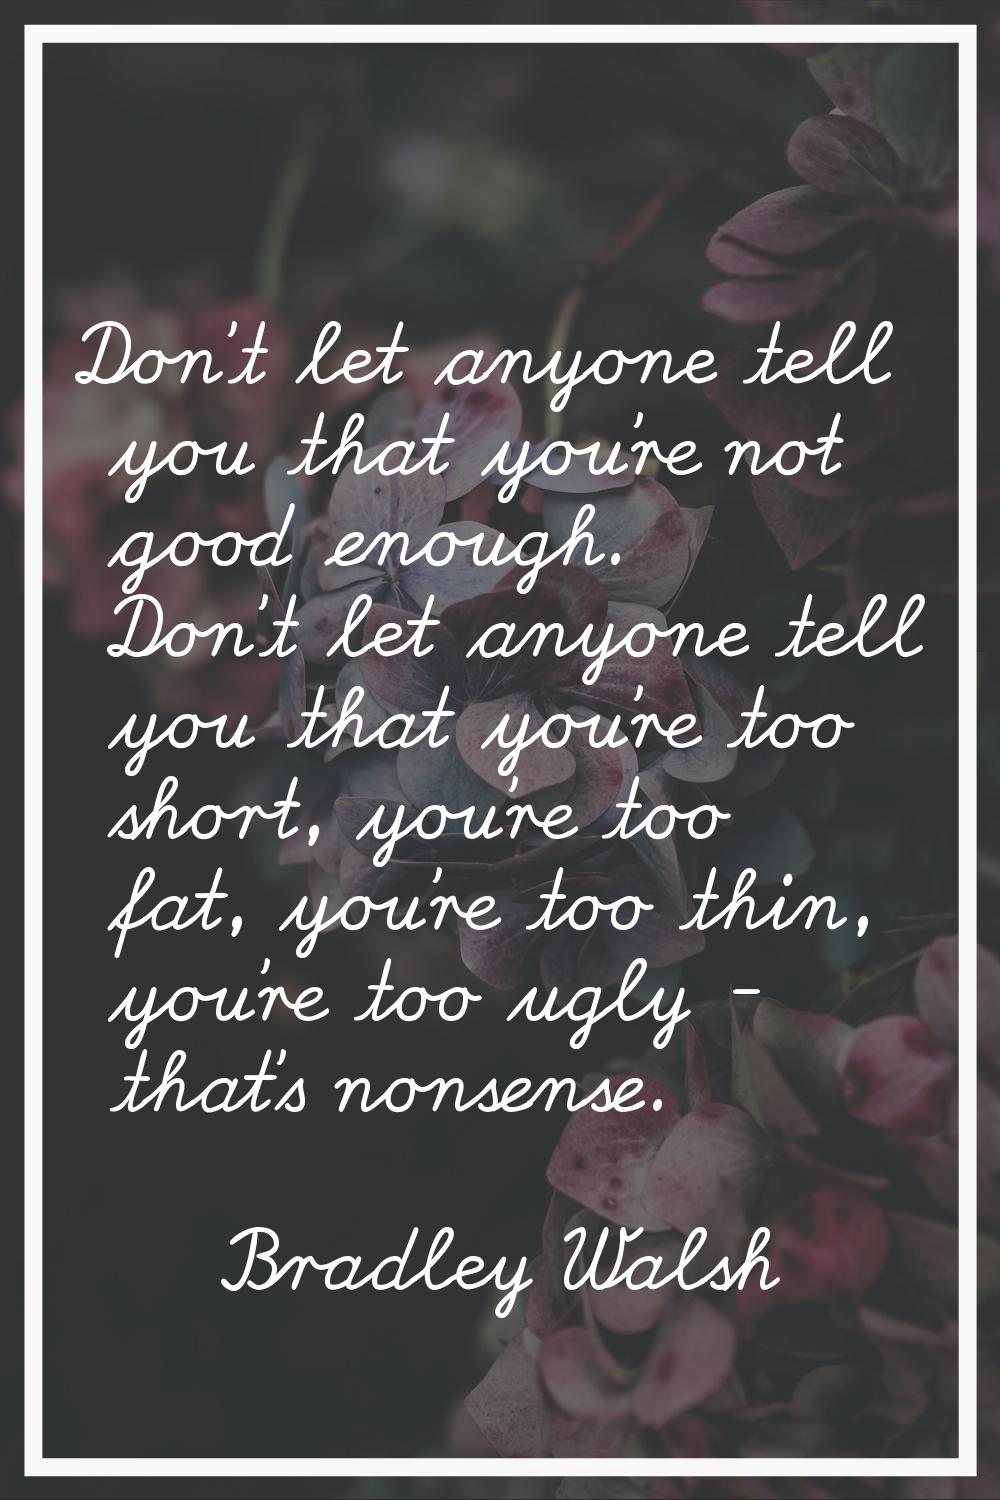 Don't let anyone tell you that you're not good enough. Don't let anyone tell you that you're too sh